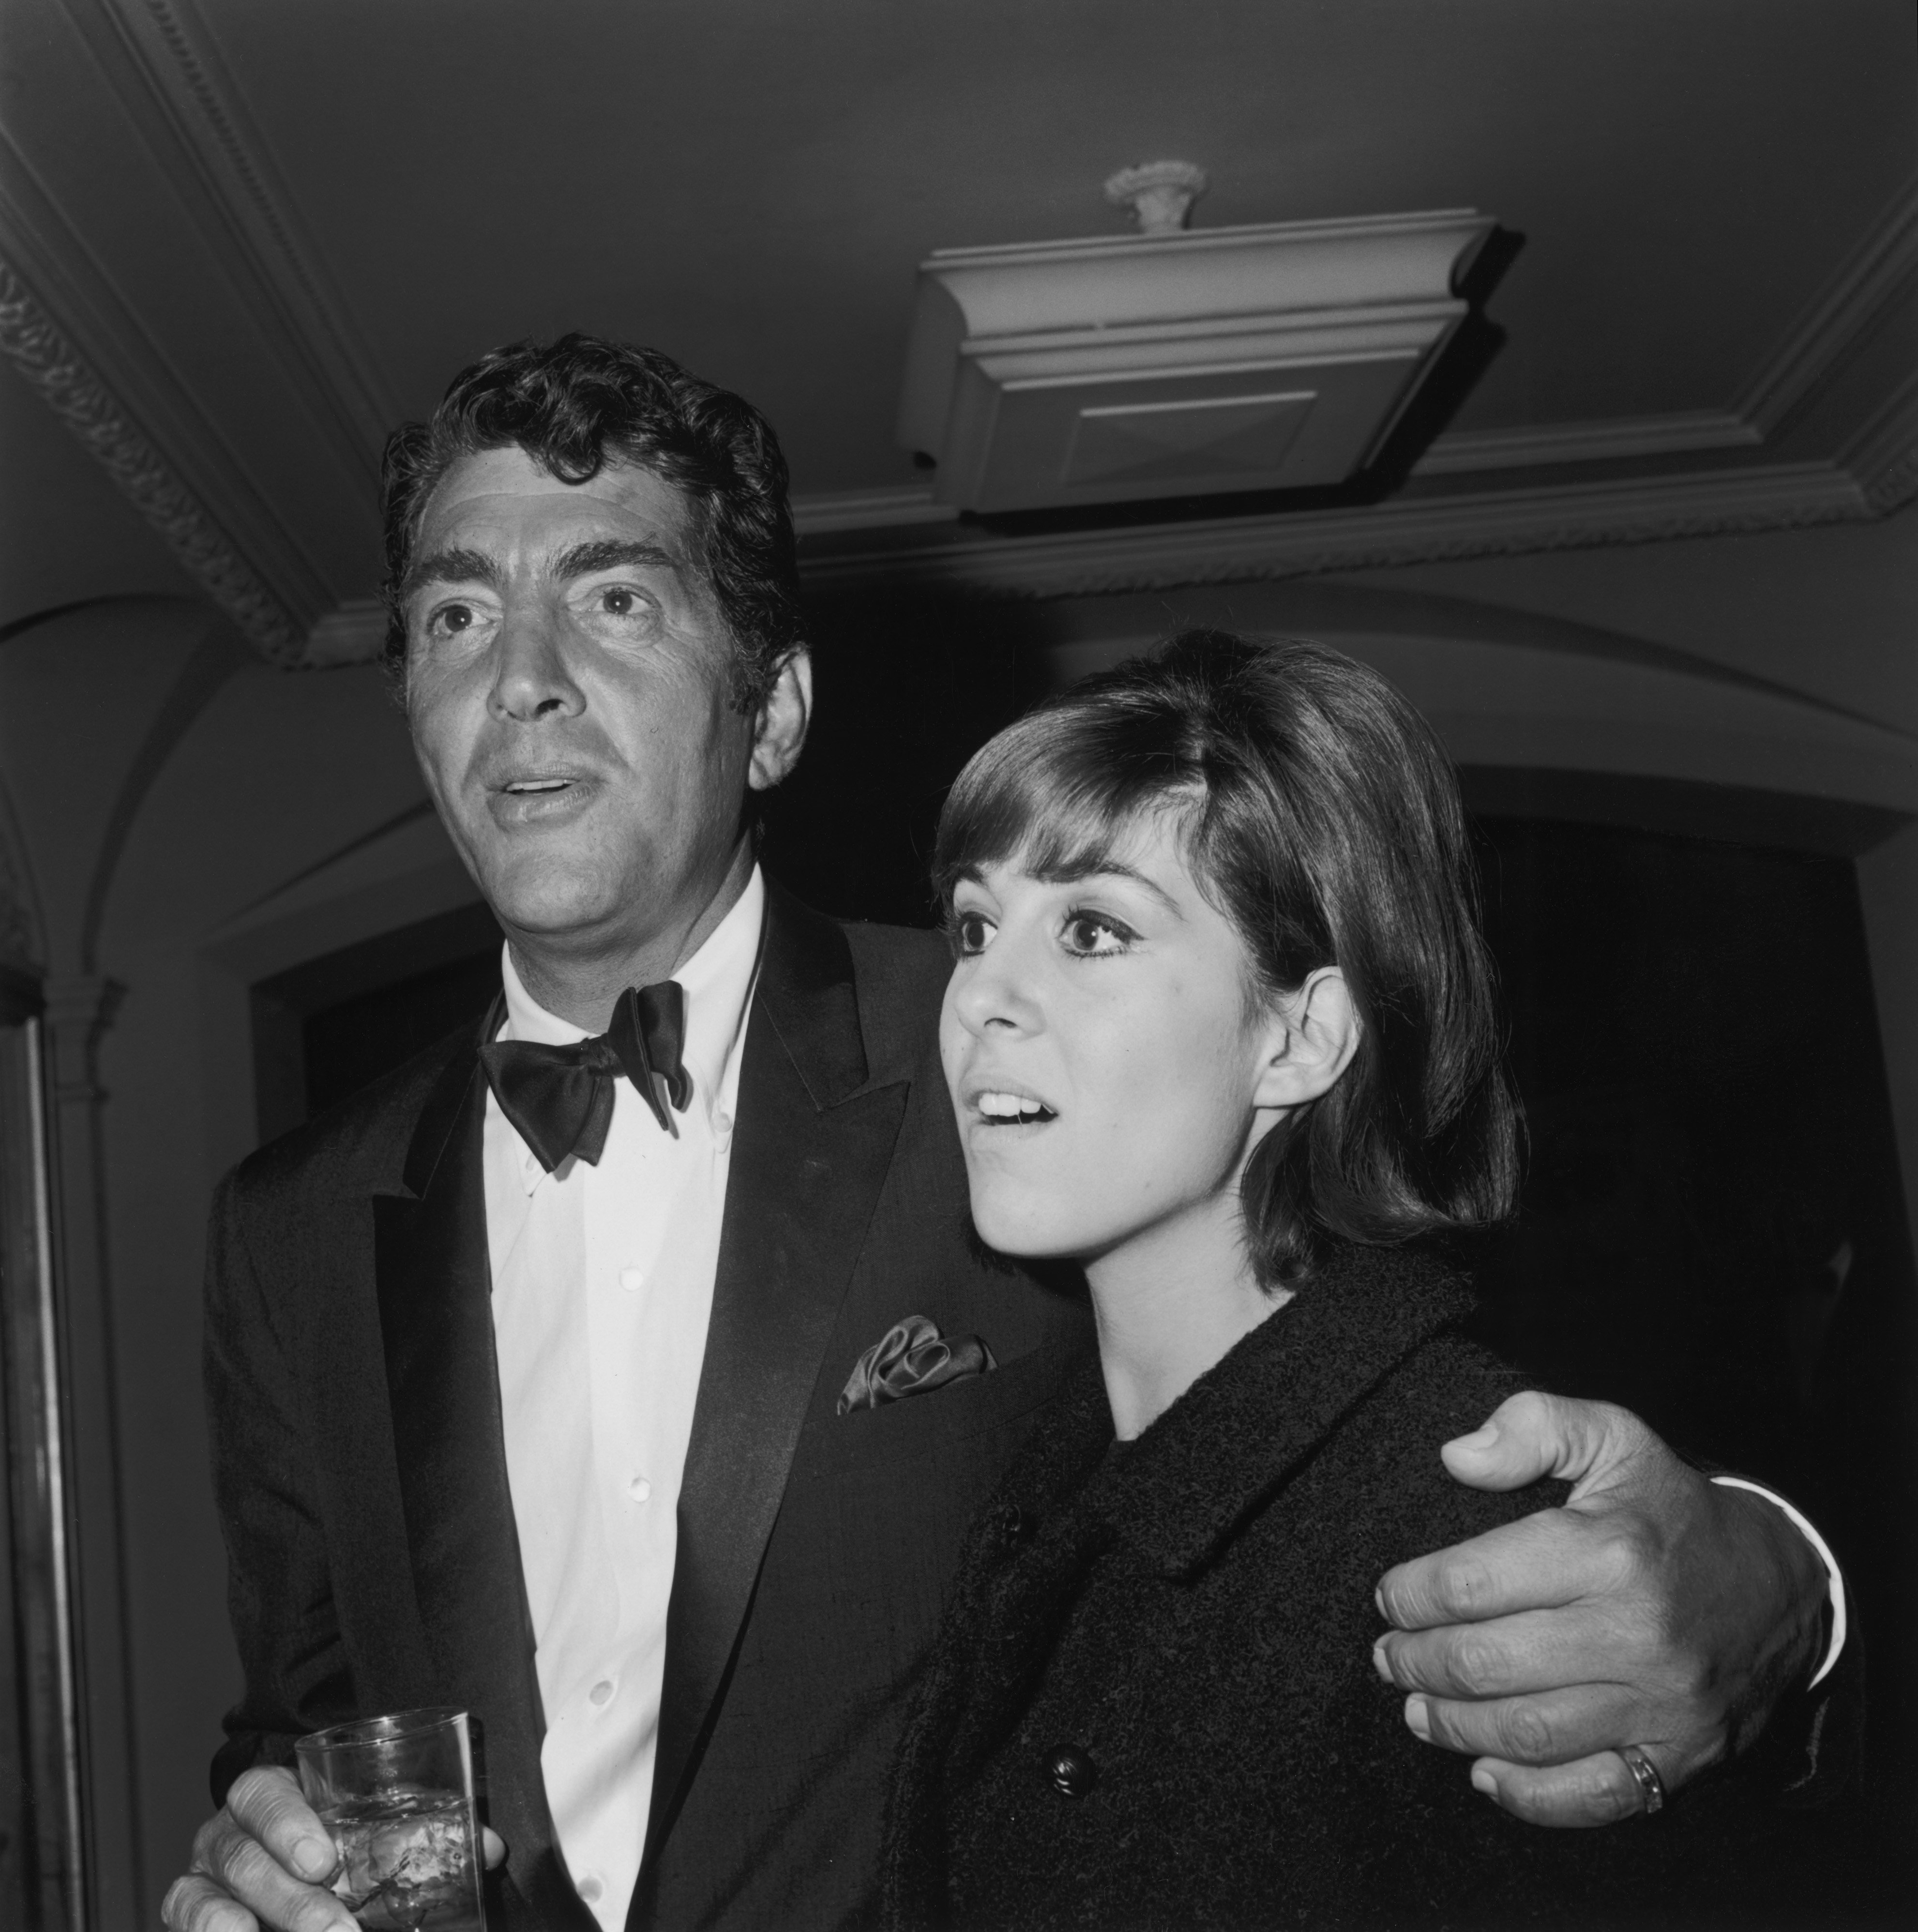 American actor and singer Dean Martin with his arm around his daughter Deana at a Hollywood event, December 1965 | Photo: Getty Images